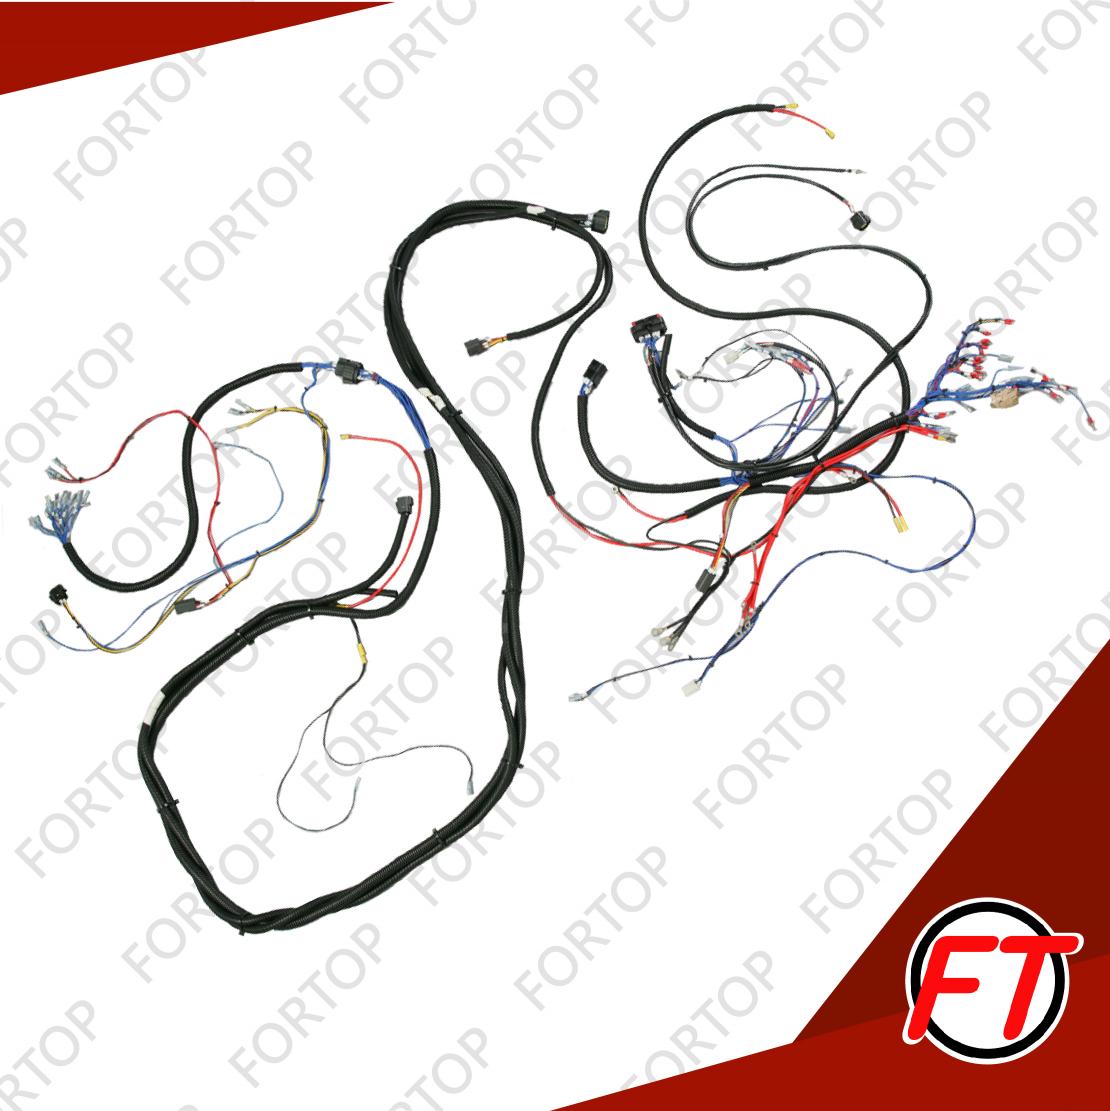 Wiring Harness for Fork Lifter